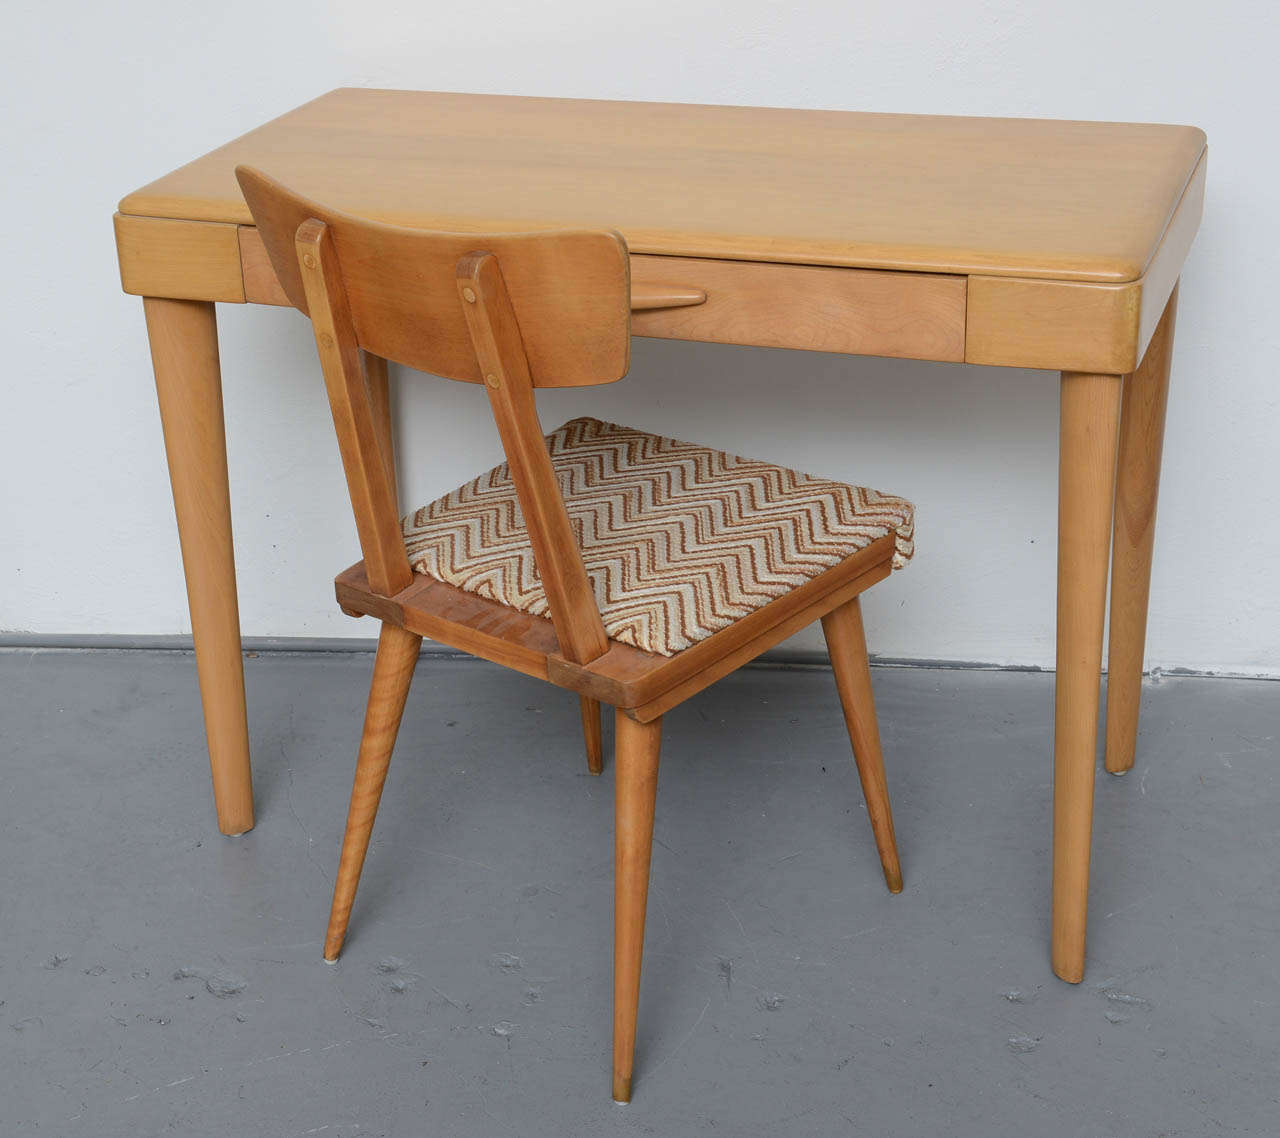 Heywood Wakefield Maple Desk 1960s Chair Sold Desk Comes Solo At